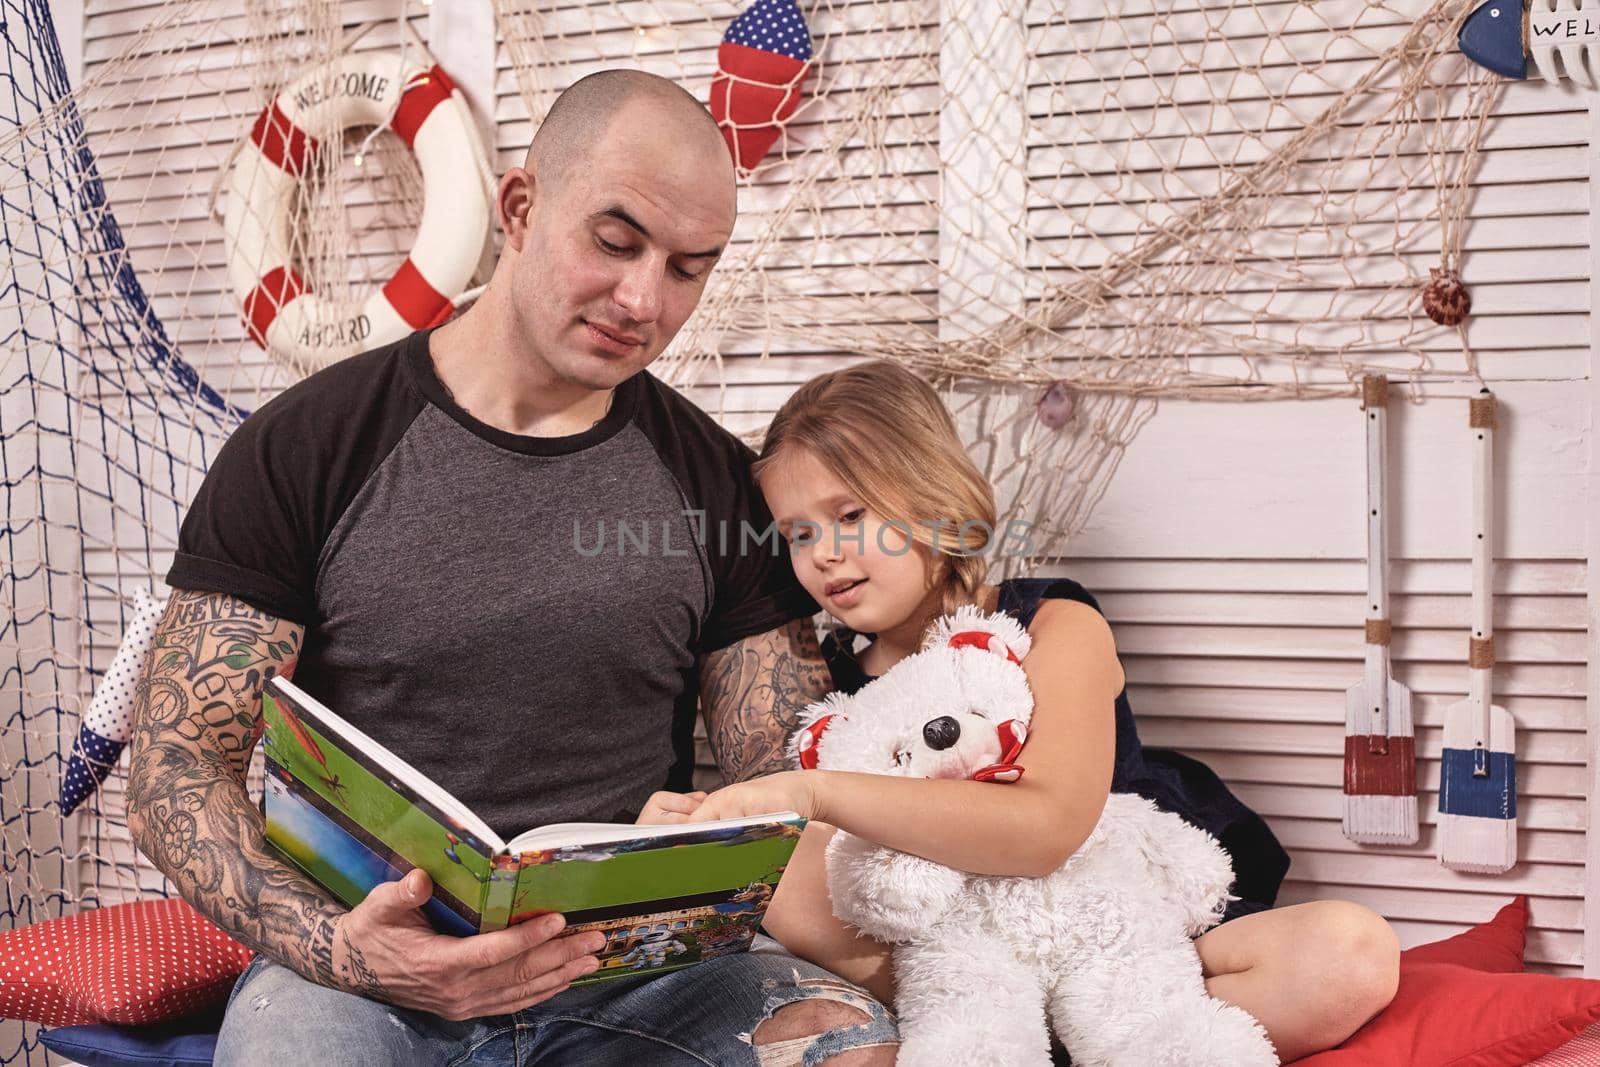 Athletic tattoed man in a cap is spending time with his little cute daughter. They are sitting on a white bench with some red pillows, in a room decorated in a marine style. She is holding a toy bear and looking at the book. Reading fairytales while daughter is sitting nearby. Happy family.